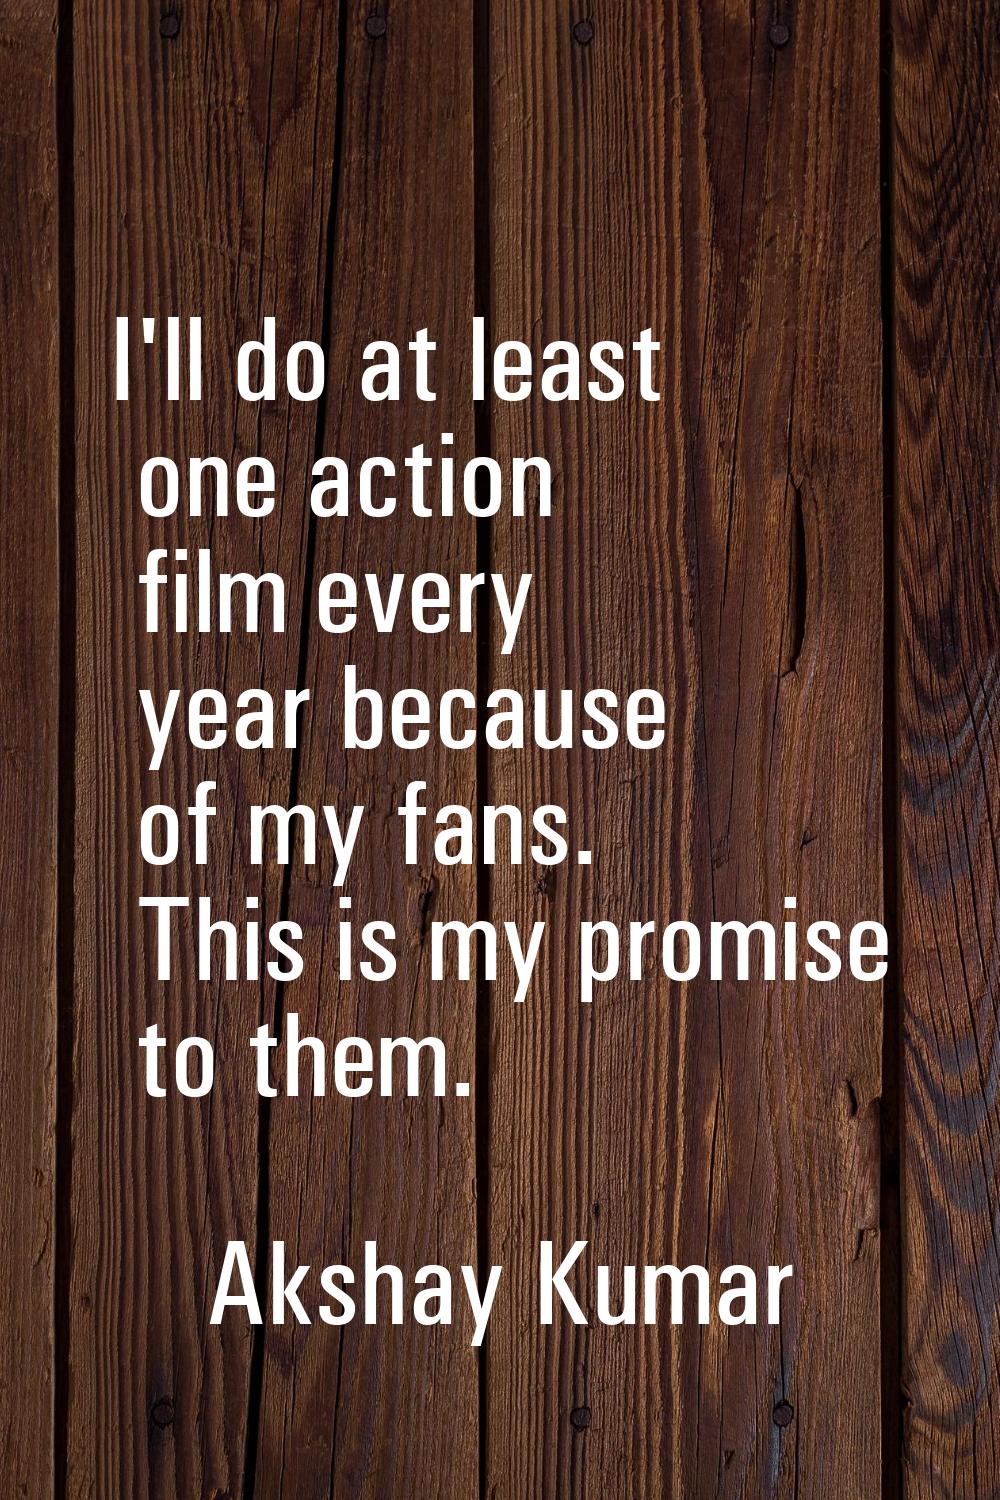 I'll do at least one action film every year because of my fans. This is my promise to them.